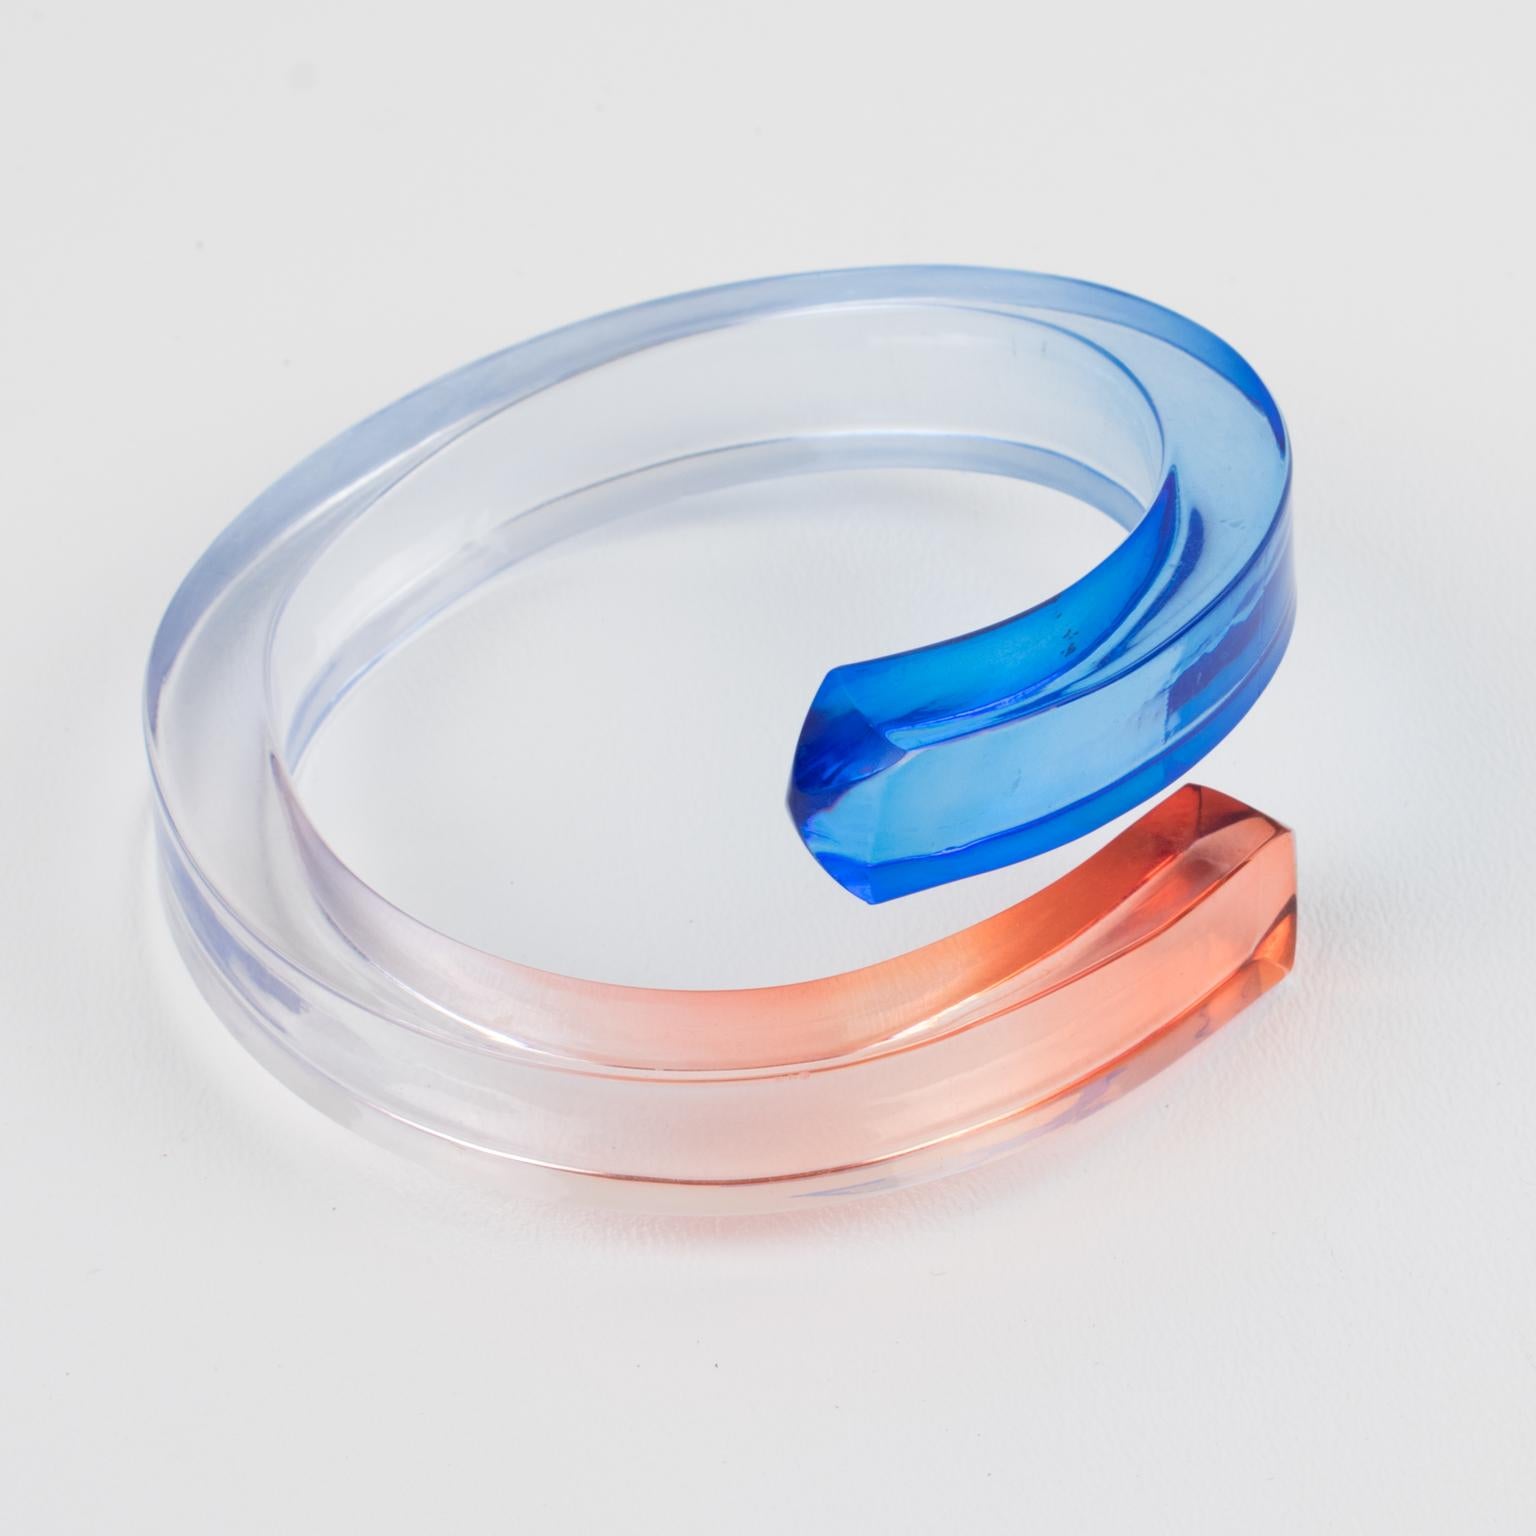 This stunning 1980s Space Age sculptural Lucite bracelet bangle features a chunky hand-crafted oversized coiled, wrapped shape with mostly transparent color and endings in arctic blue and salmon pink colors. There is no visible maker's mark.
Good